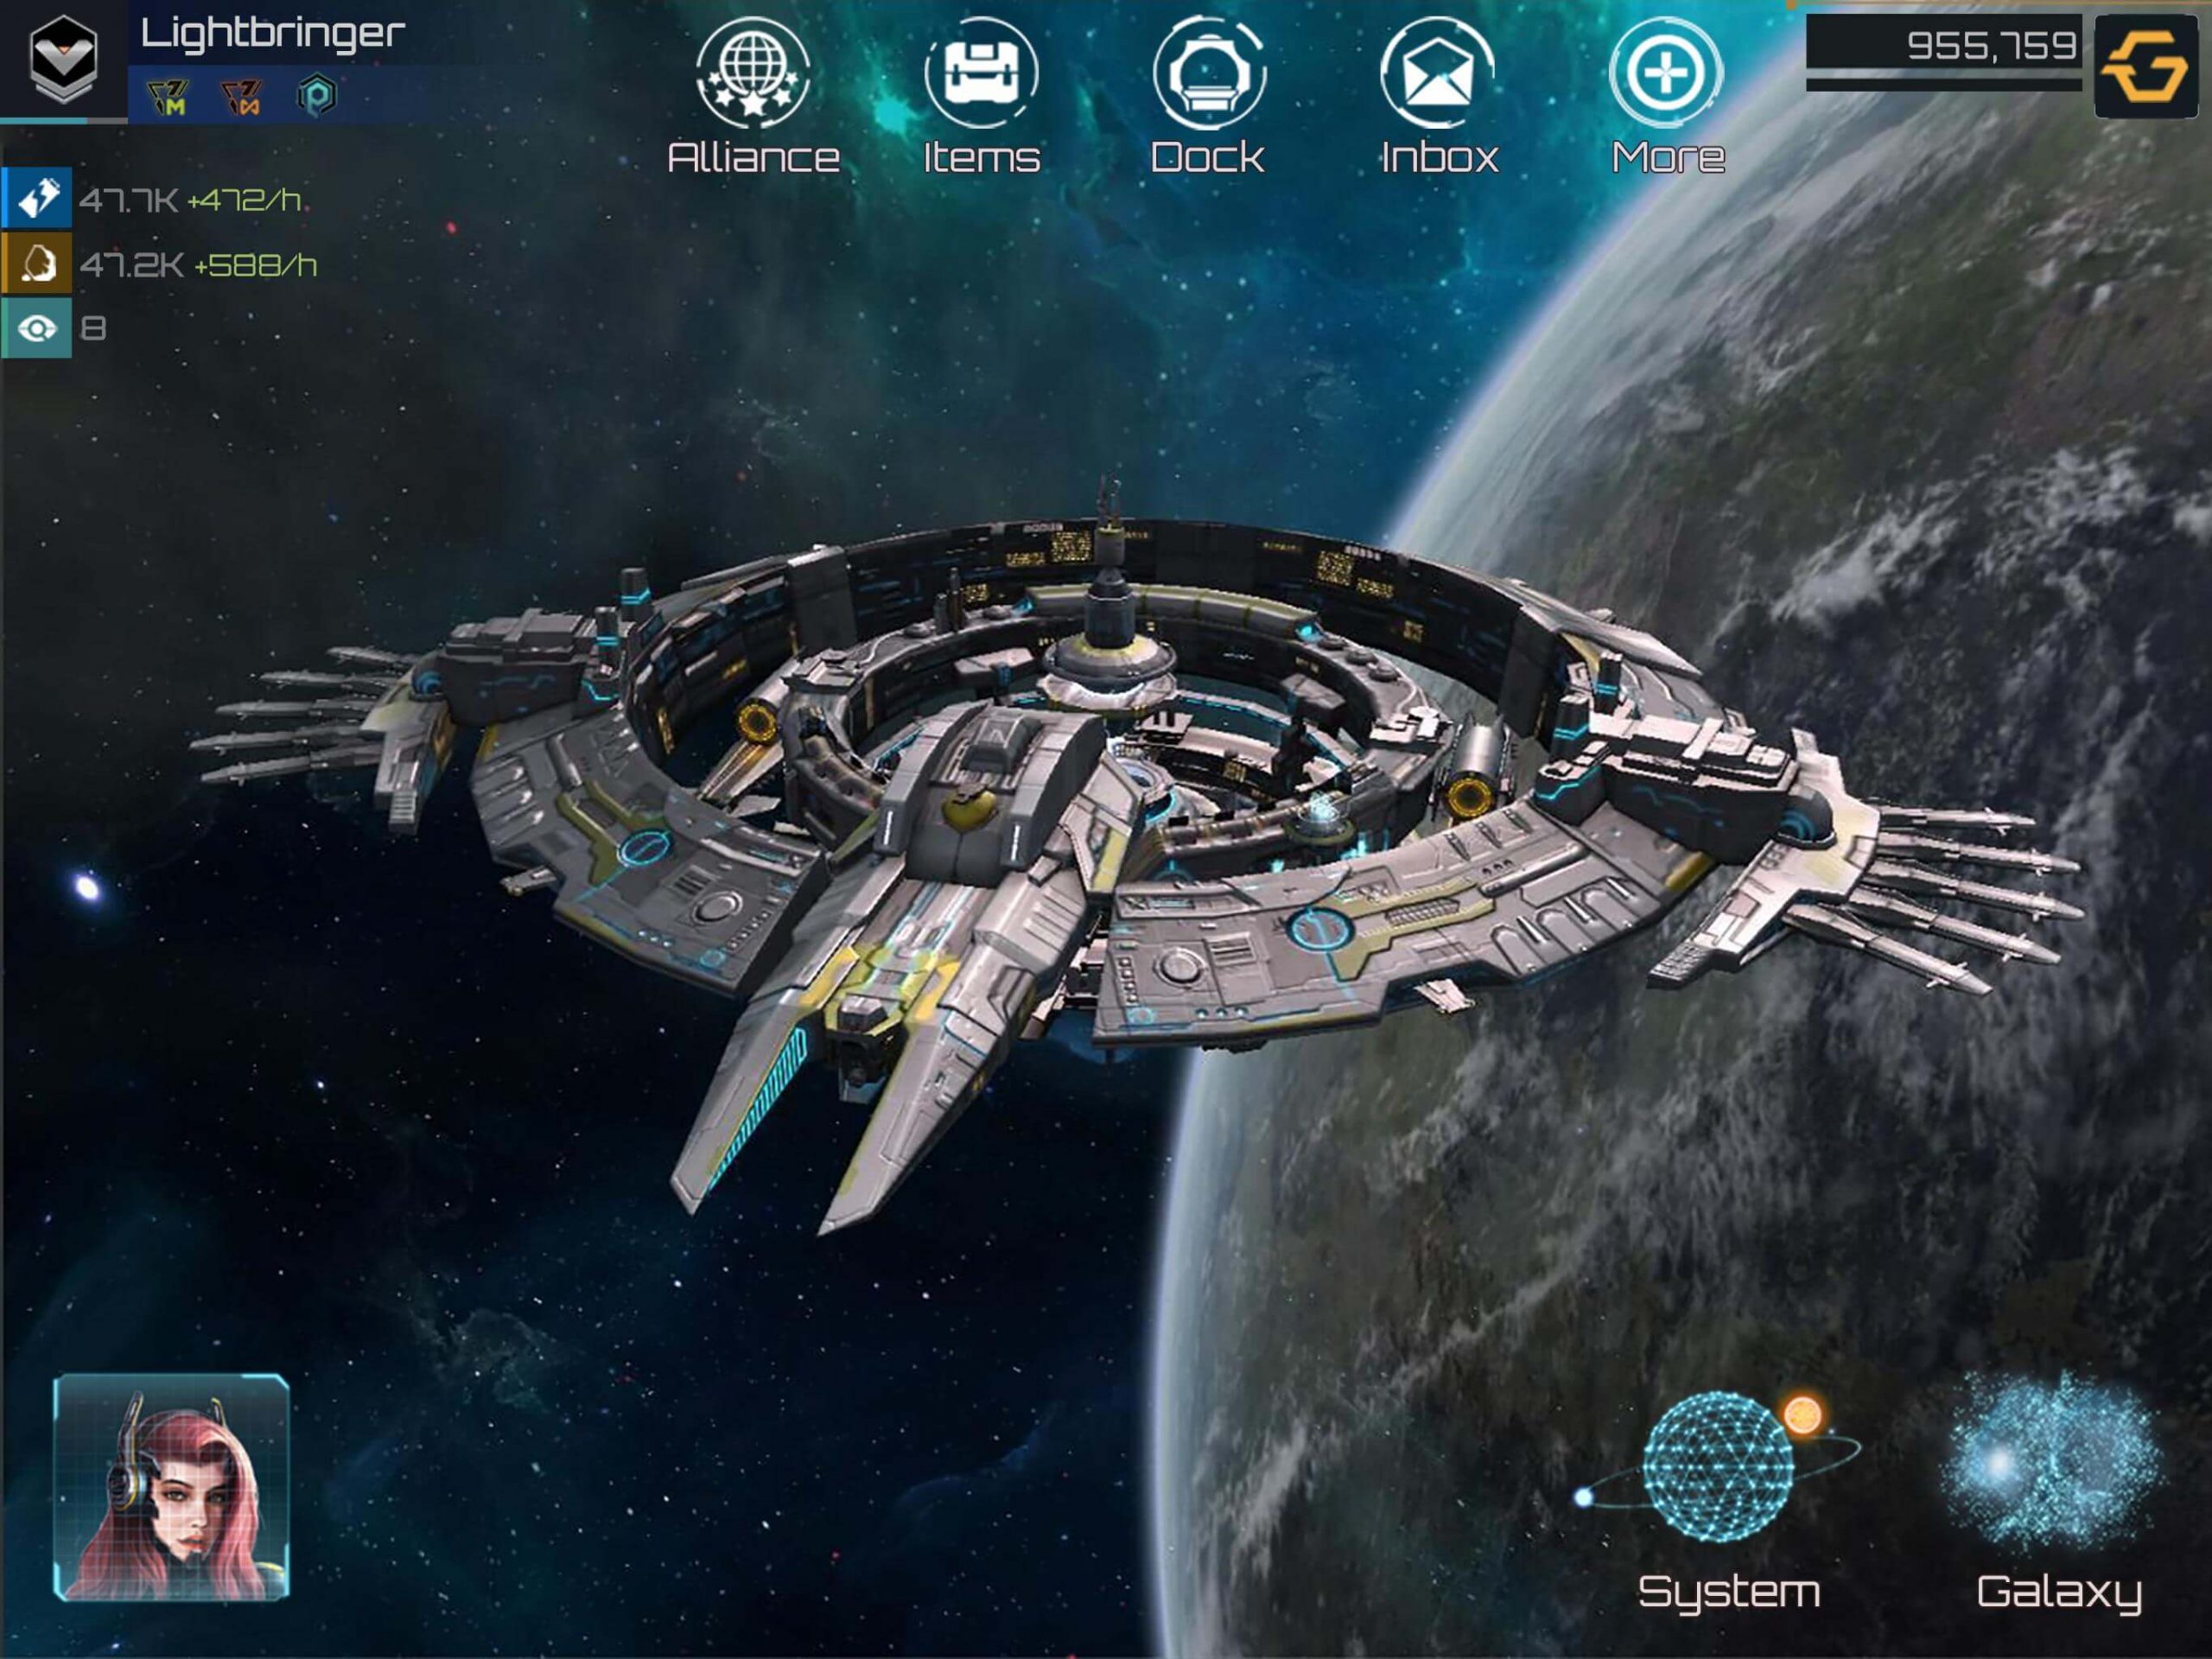 Nova empire is one of the best strategic game with good graphics.